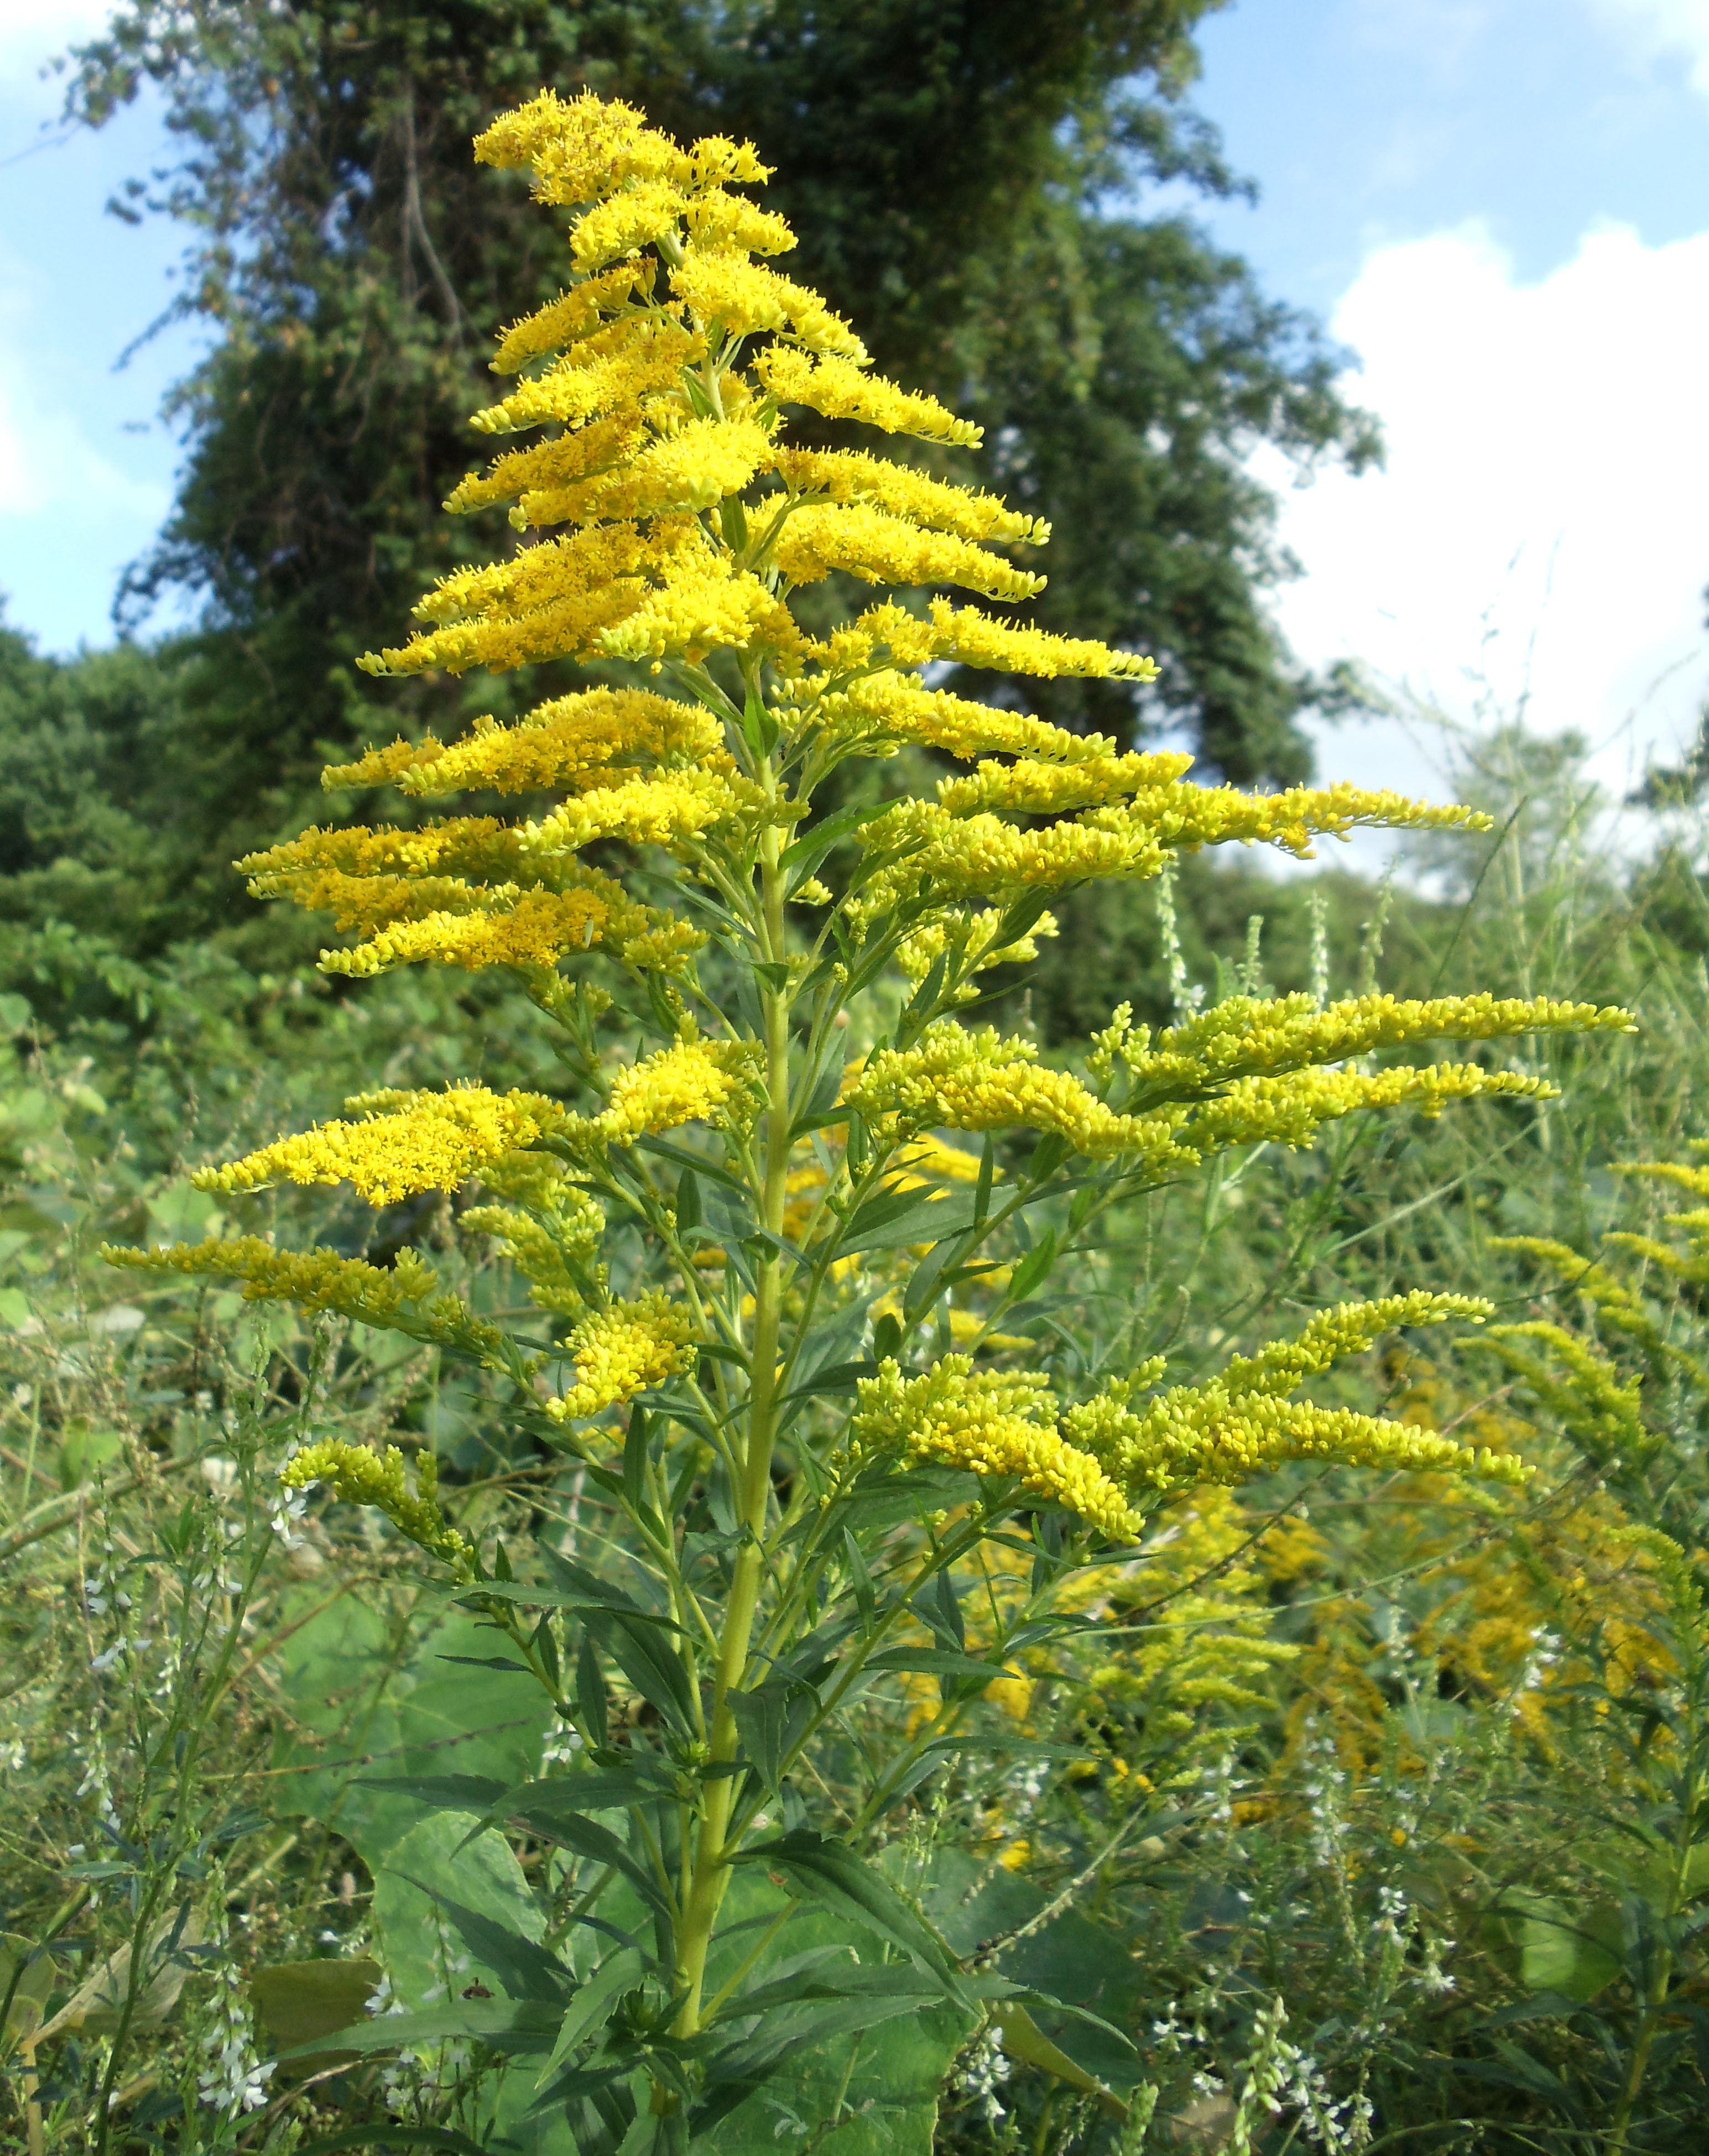 What does a goldenrod flower look like?